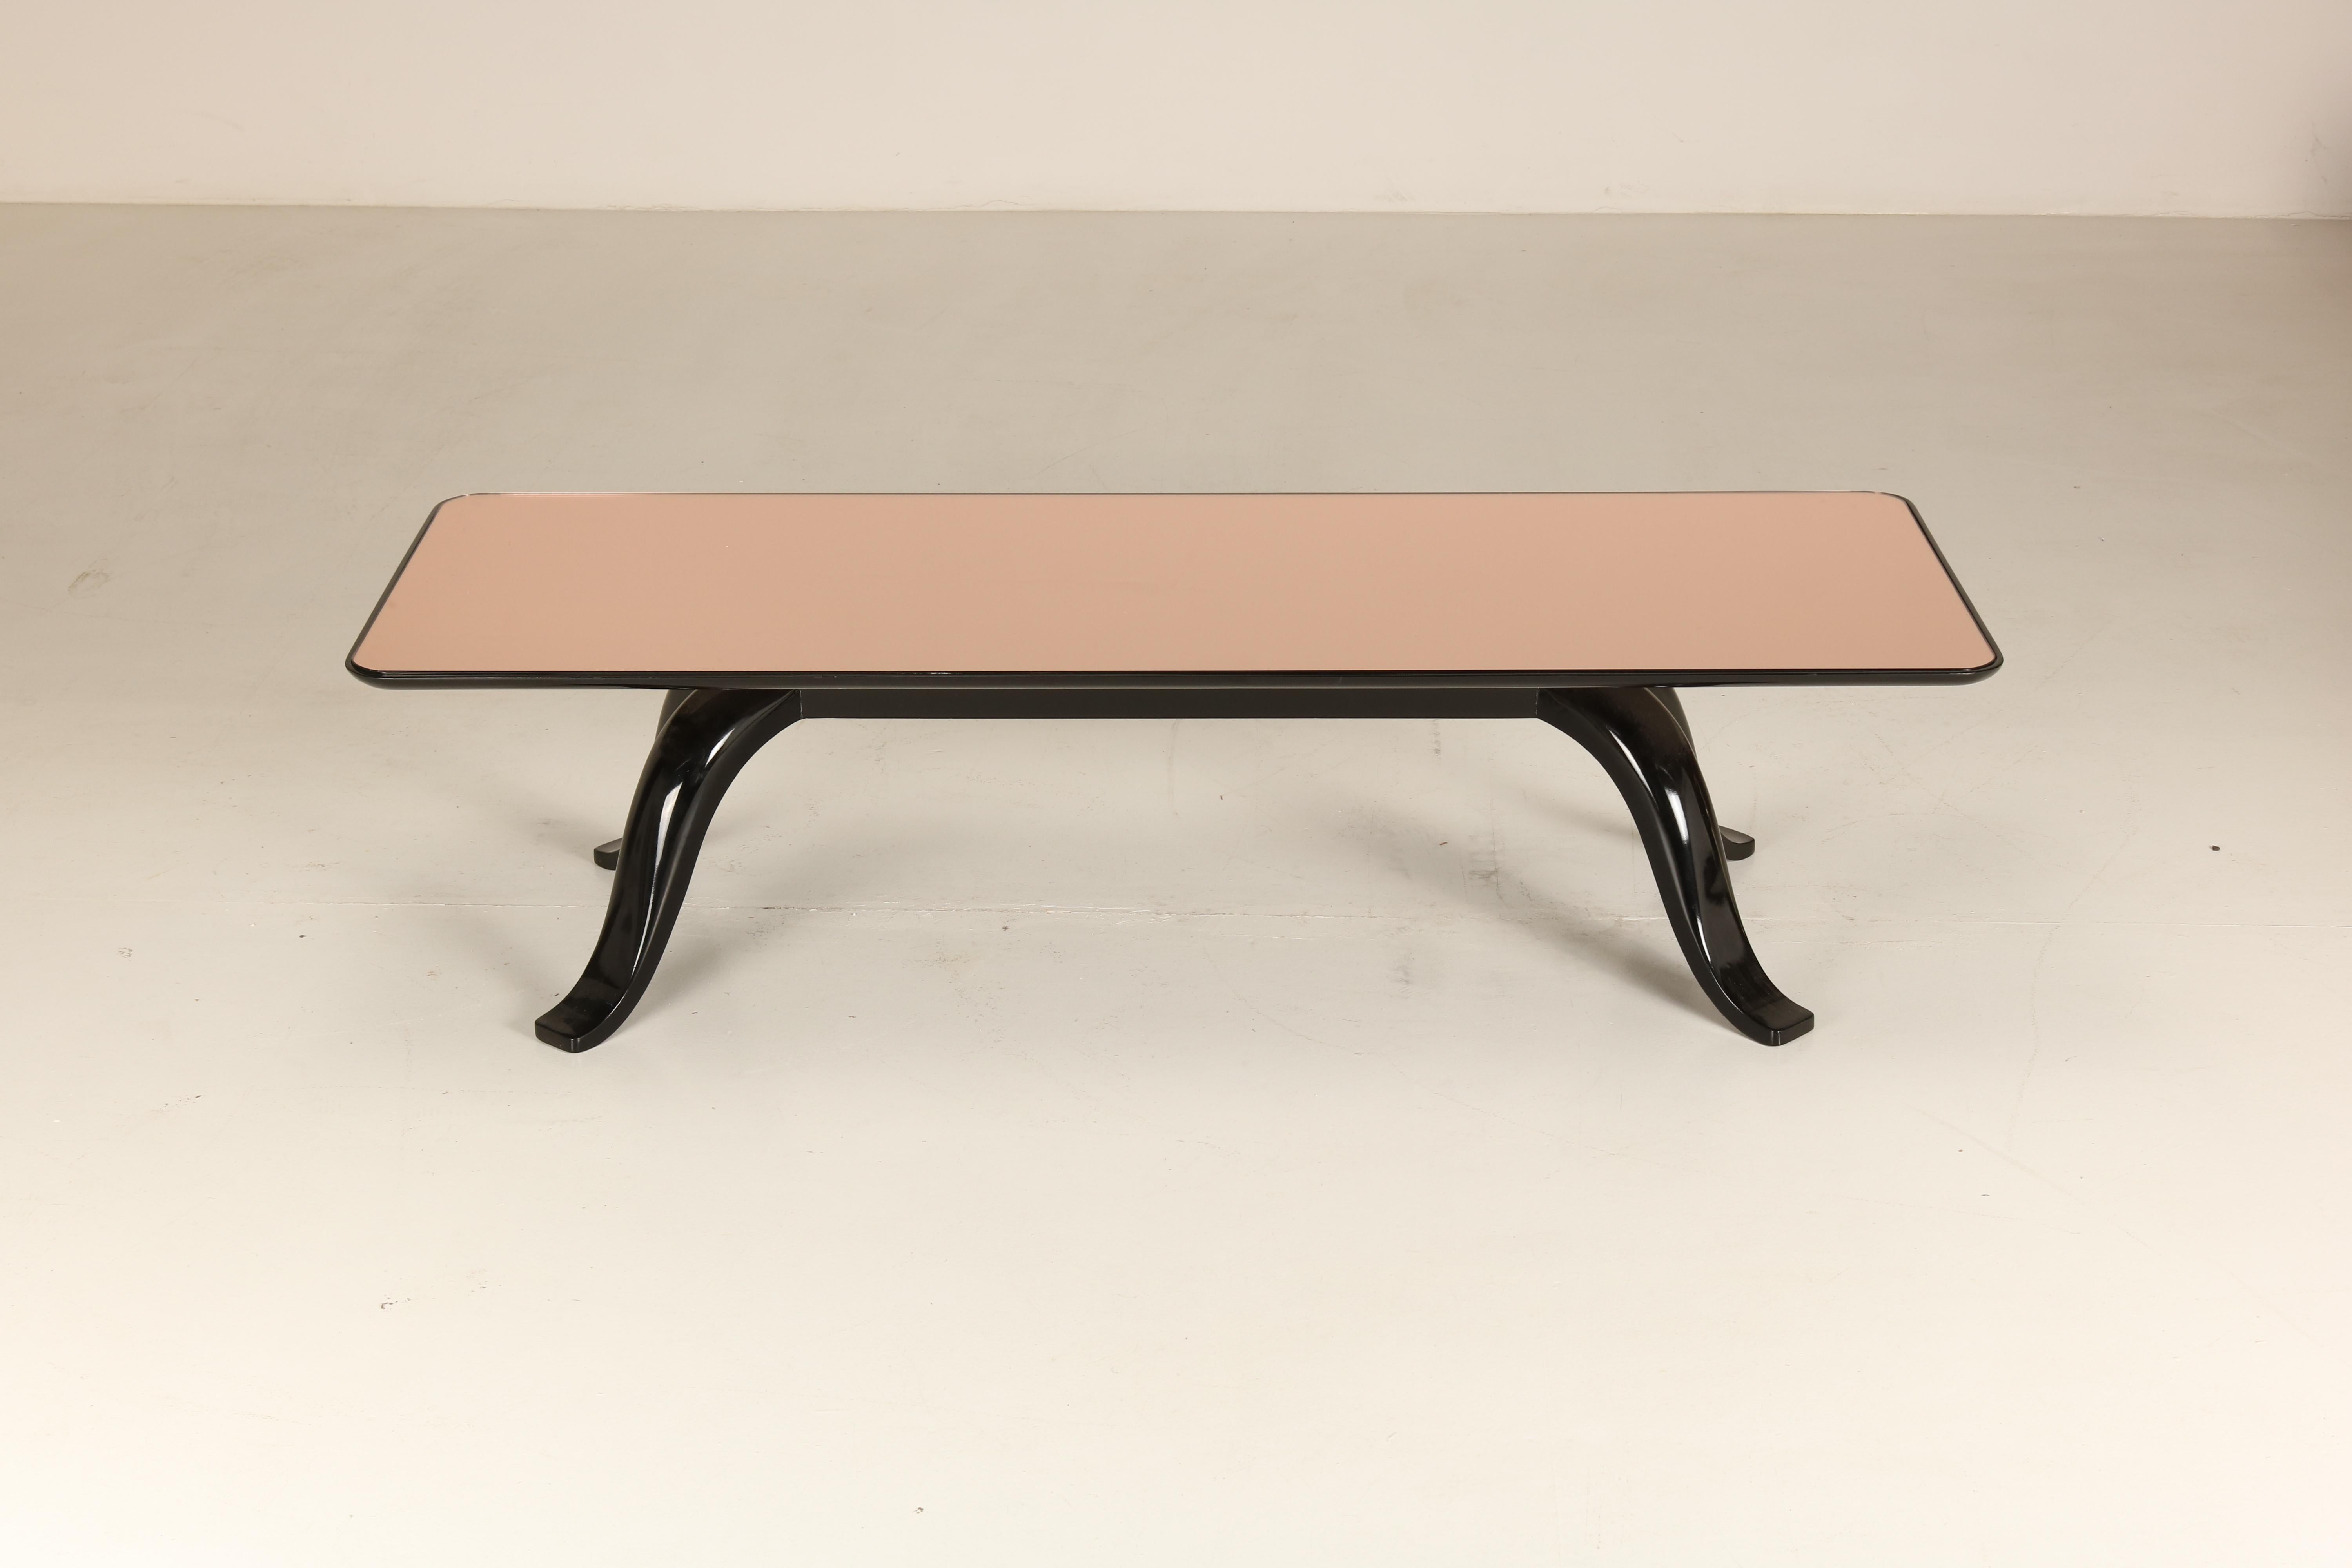 Pink Mirrored Low Table By Pietro Chiesa, Fontana Arte, Italian Design '30 For Sale 3